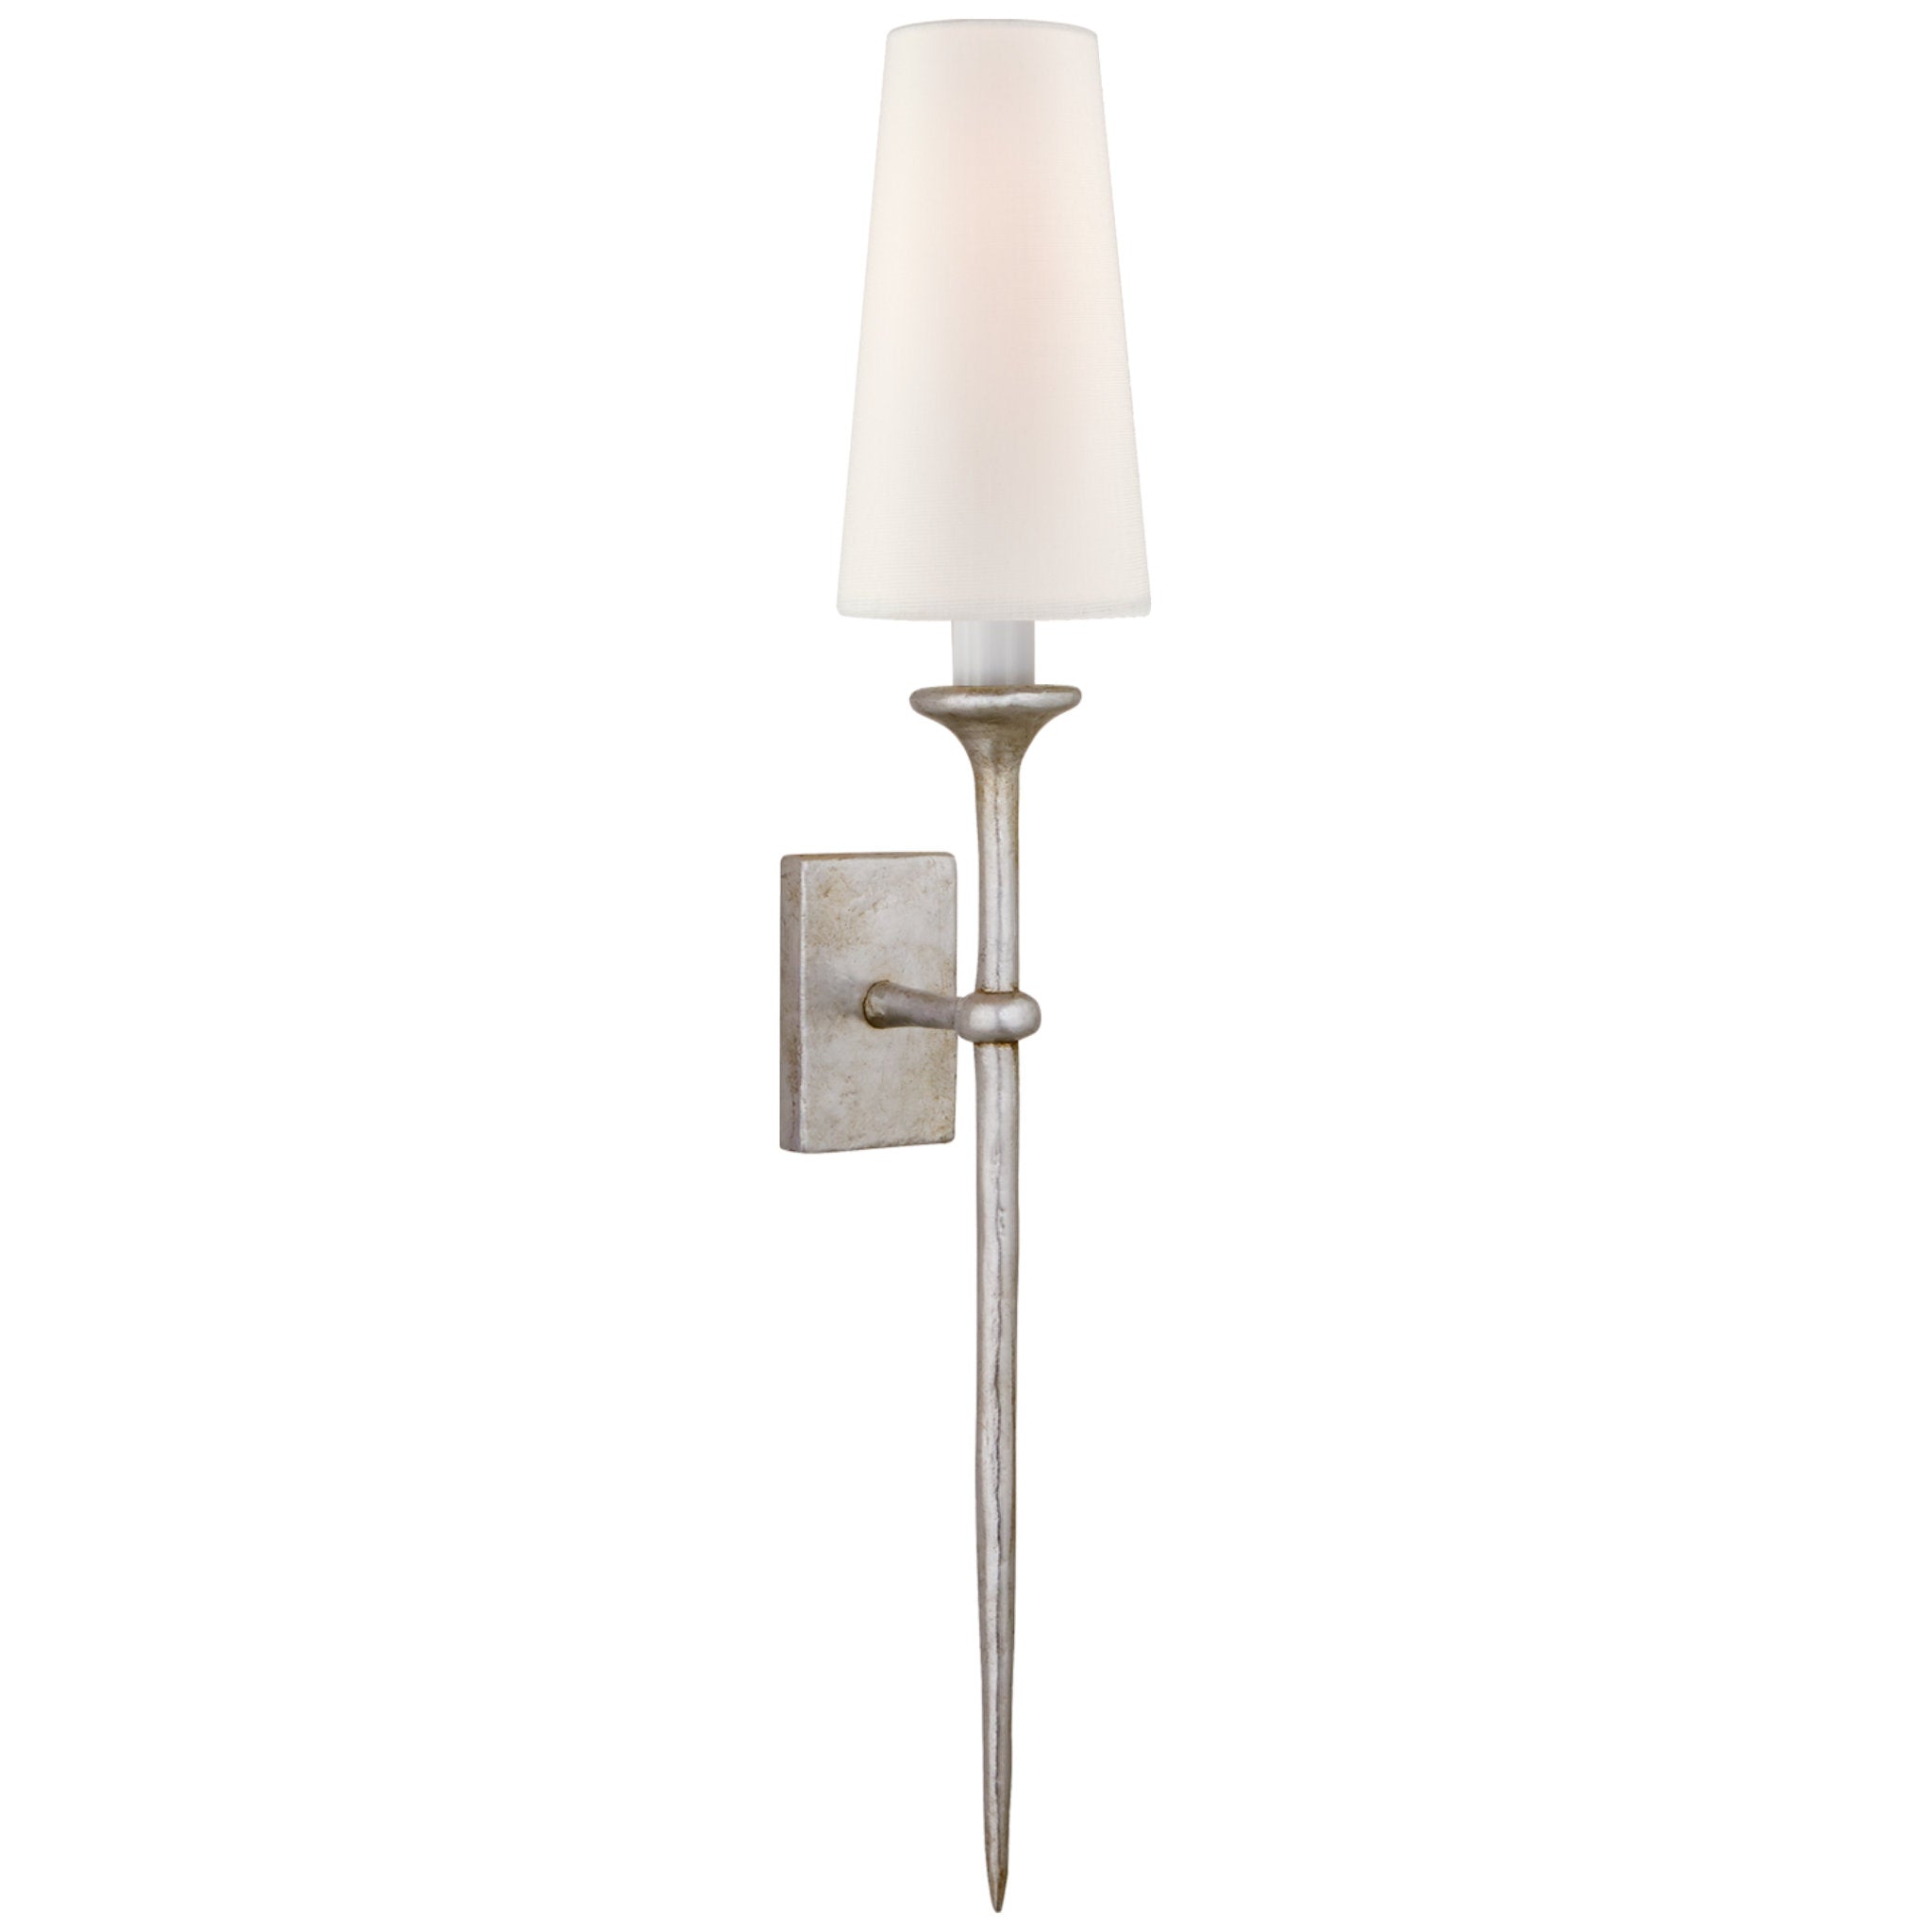 Julie Neill Iberia Single Sconce in Burnished Silver Leaf with Linen Shade